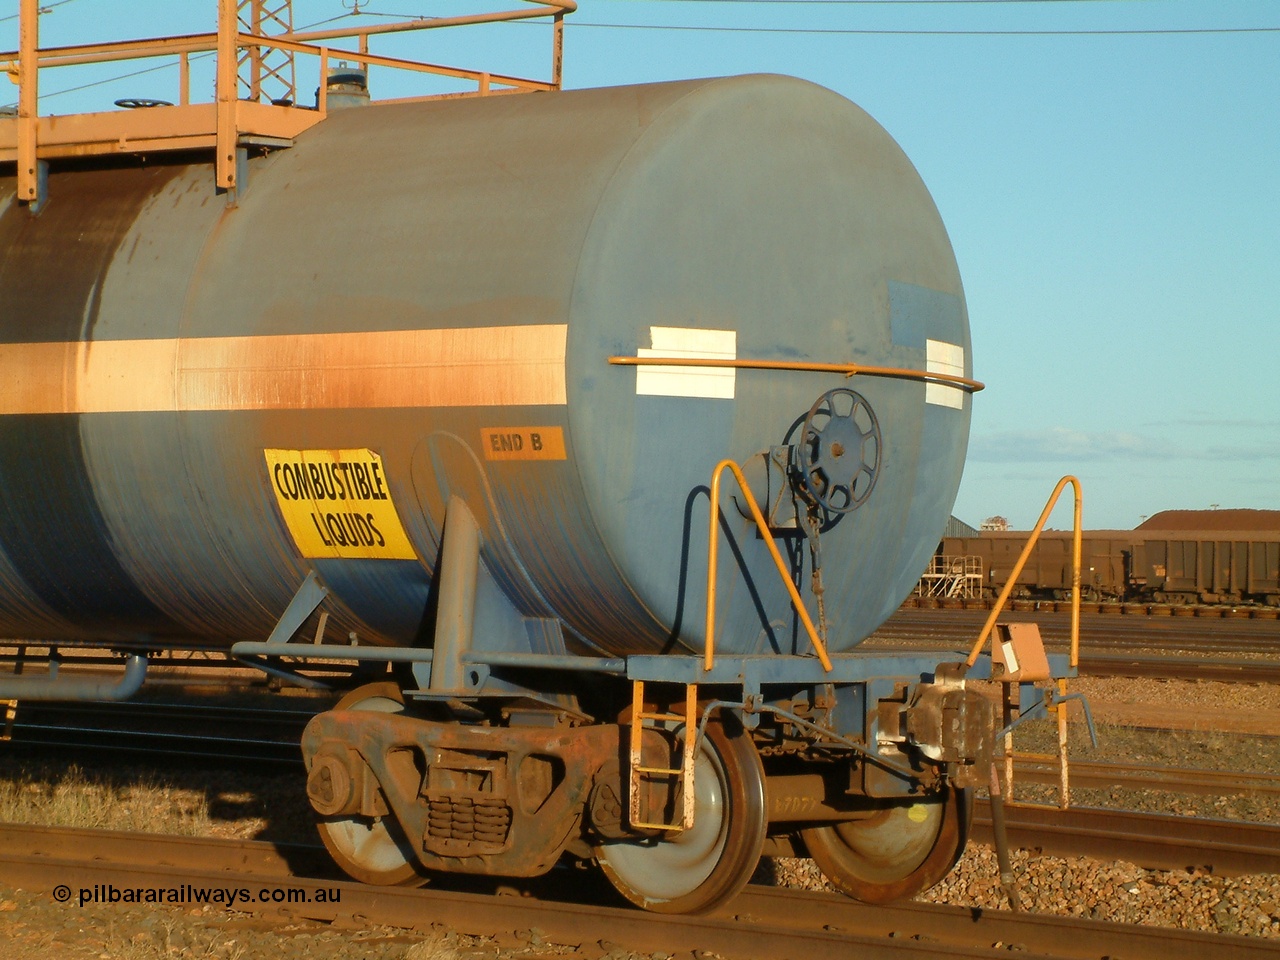 040815 171318
Nelson Point, view of hand brake end of fuel tank waggon 0020, 82 kilolitre capacity built by Comeng NSW for BP as RTC 2, used by Mt Newman Mining, unsure when converted to 0020.
Keywords: Comeng-NSW;RTC2;BHP-tank-waggon;